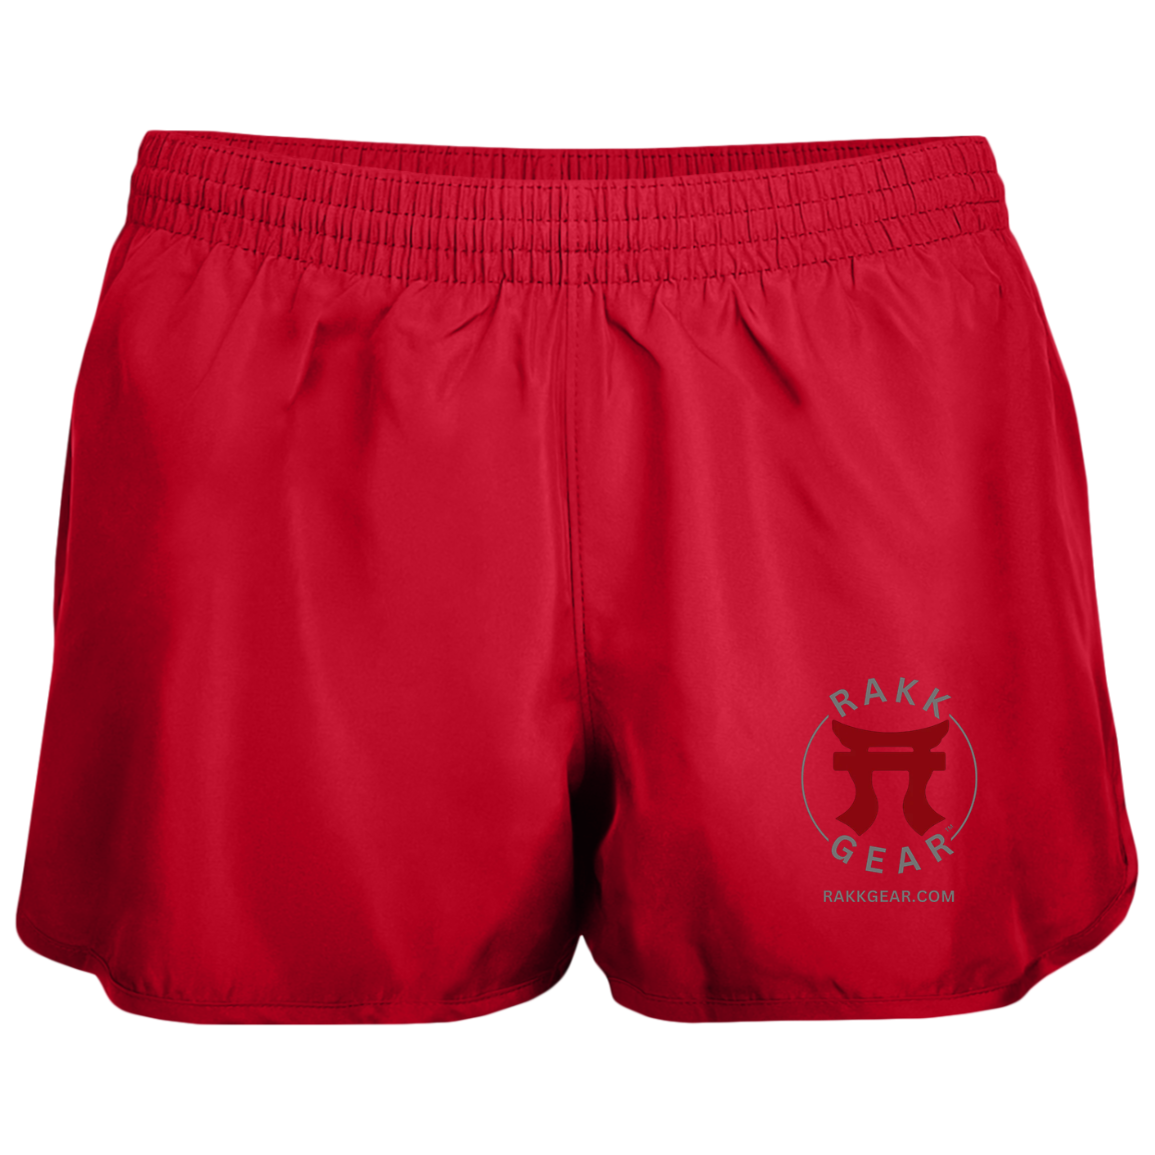 "Rakkgear Women's Wayfarer Running Shorts in Red, ideal for active pursuits with comfort and style in mind."